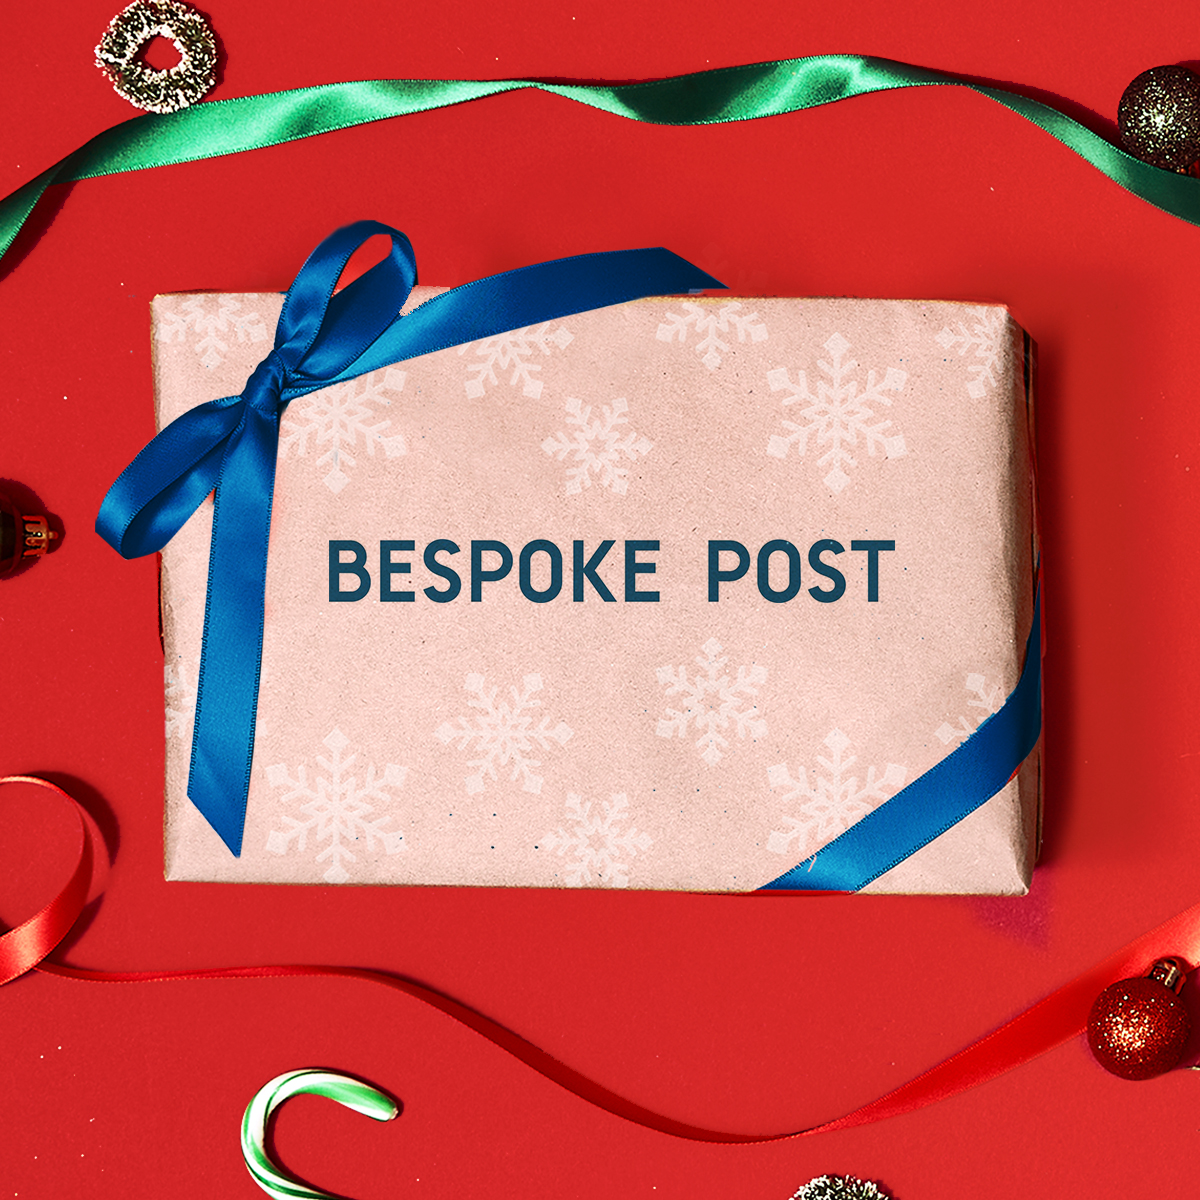 12 Days of Gratitude and Giving: Win a 1 Year Subscription to Bespoke Post